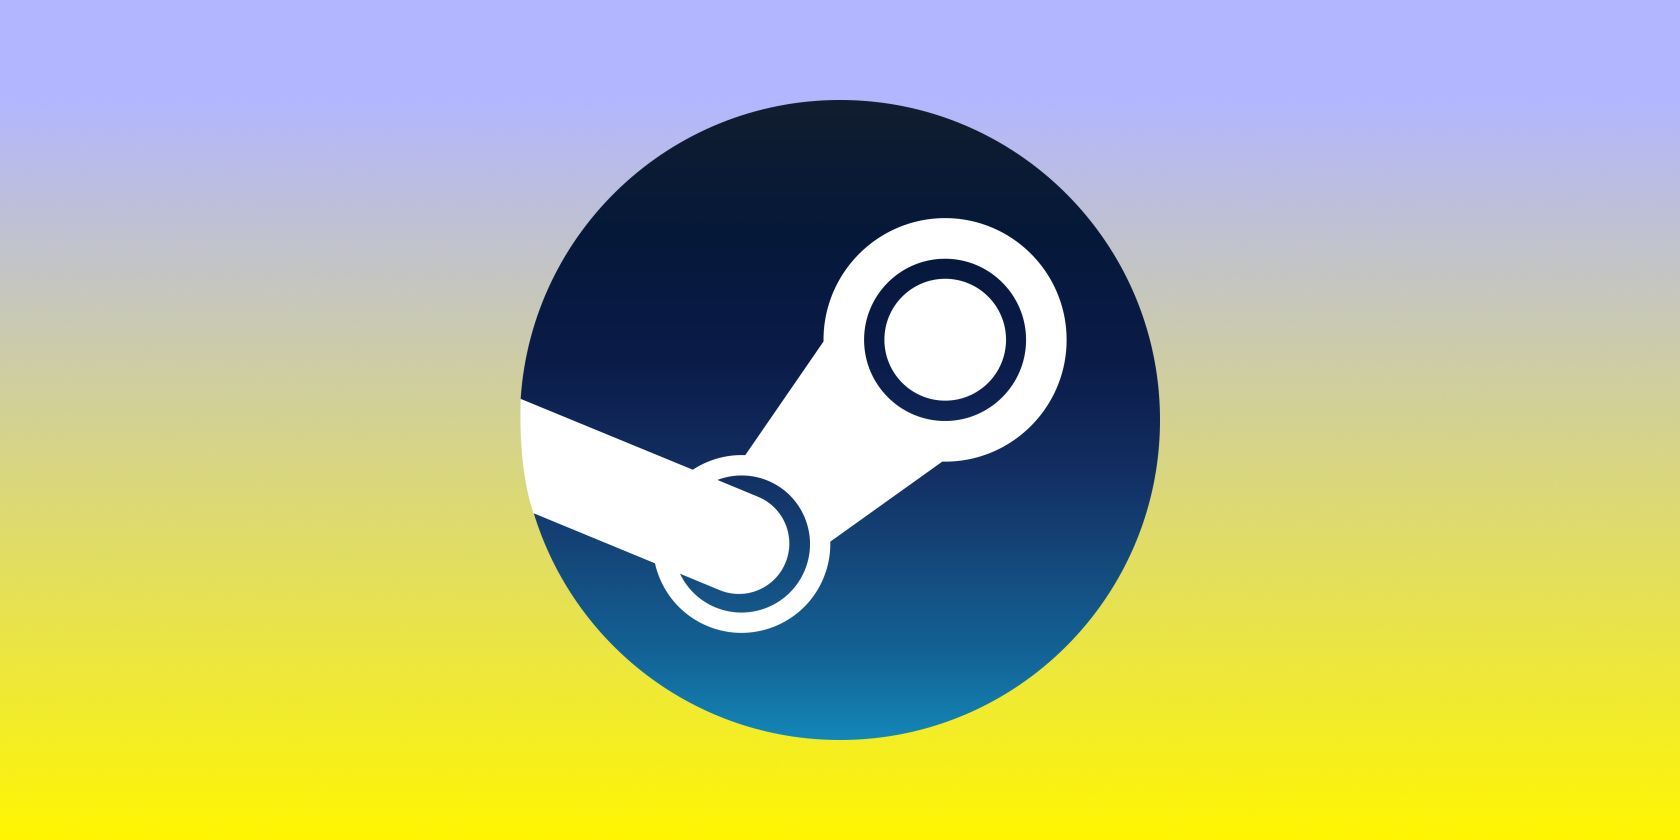 How to Find Your Steam ID Quickly